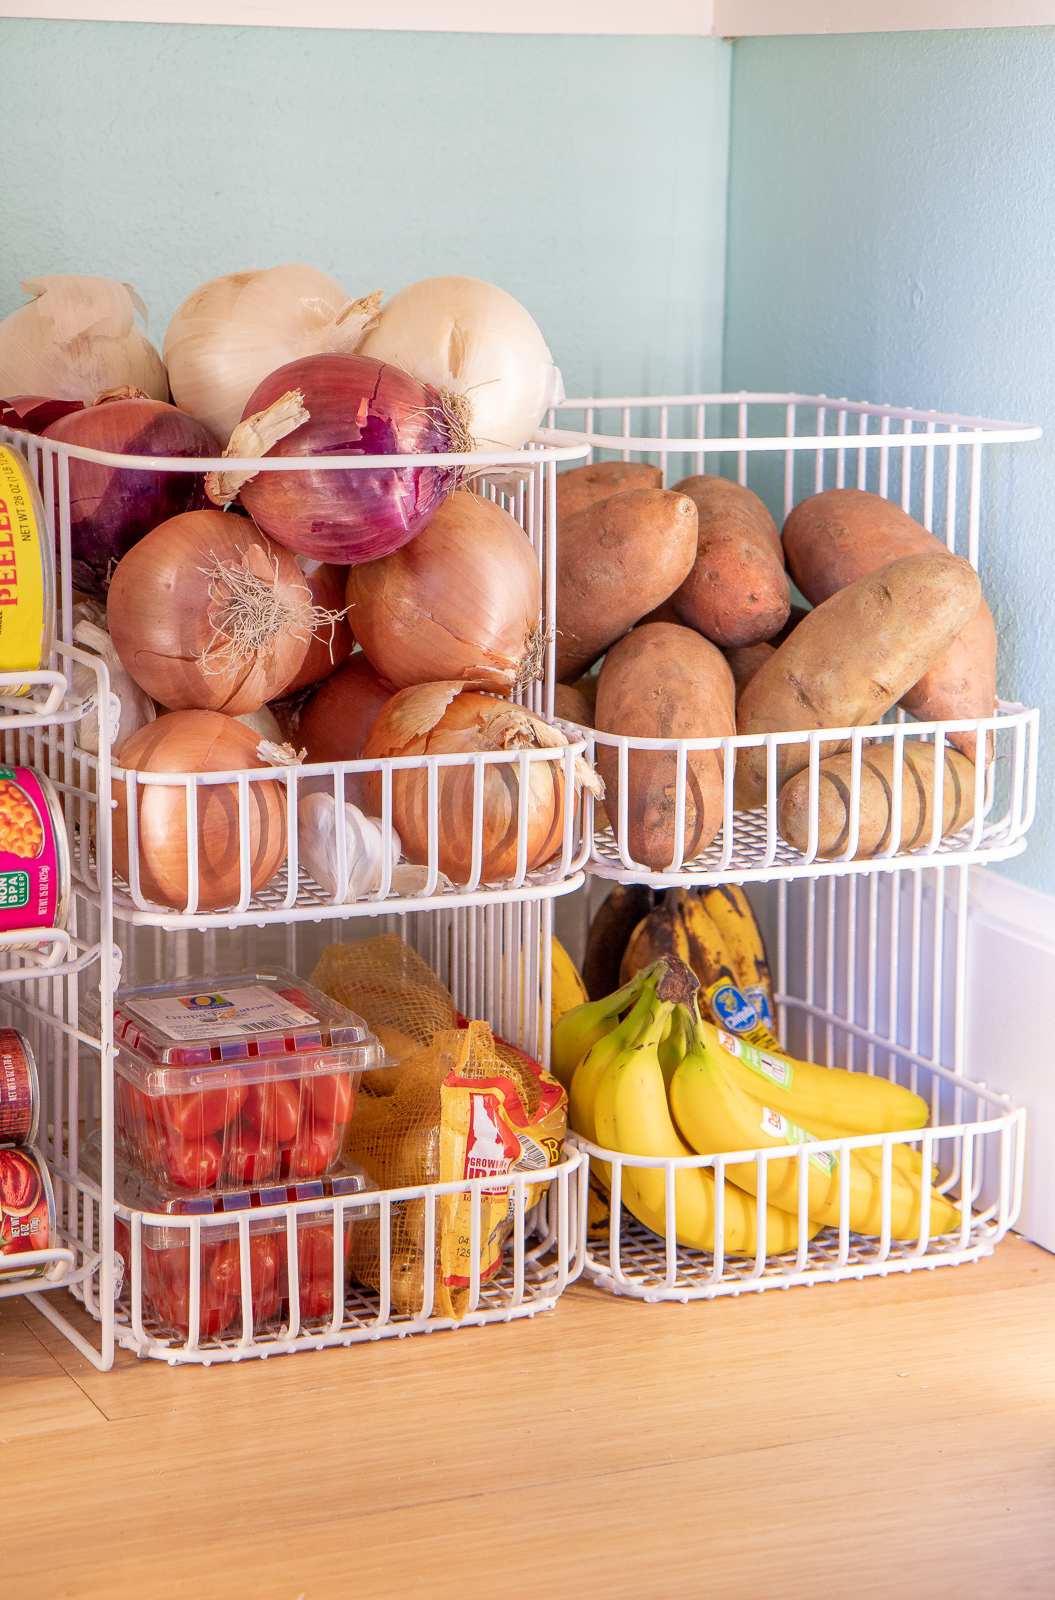 How to organize your pantry